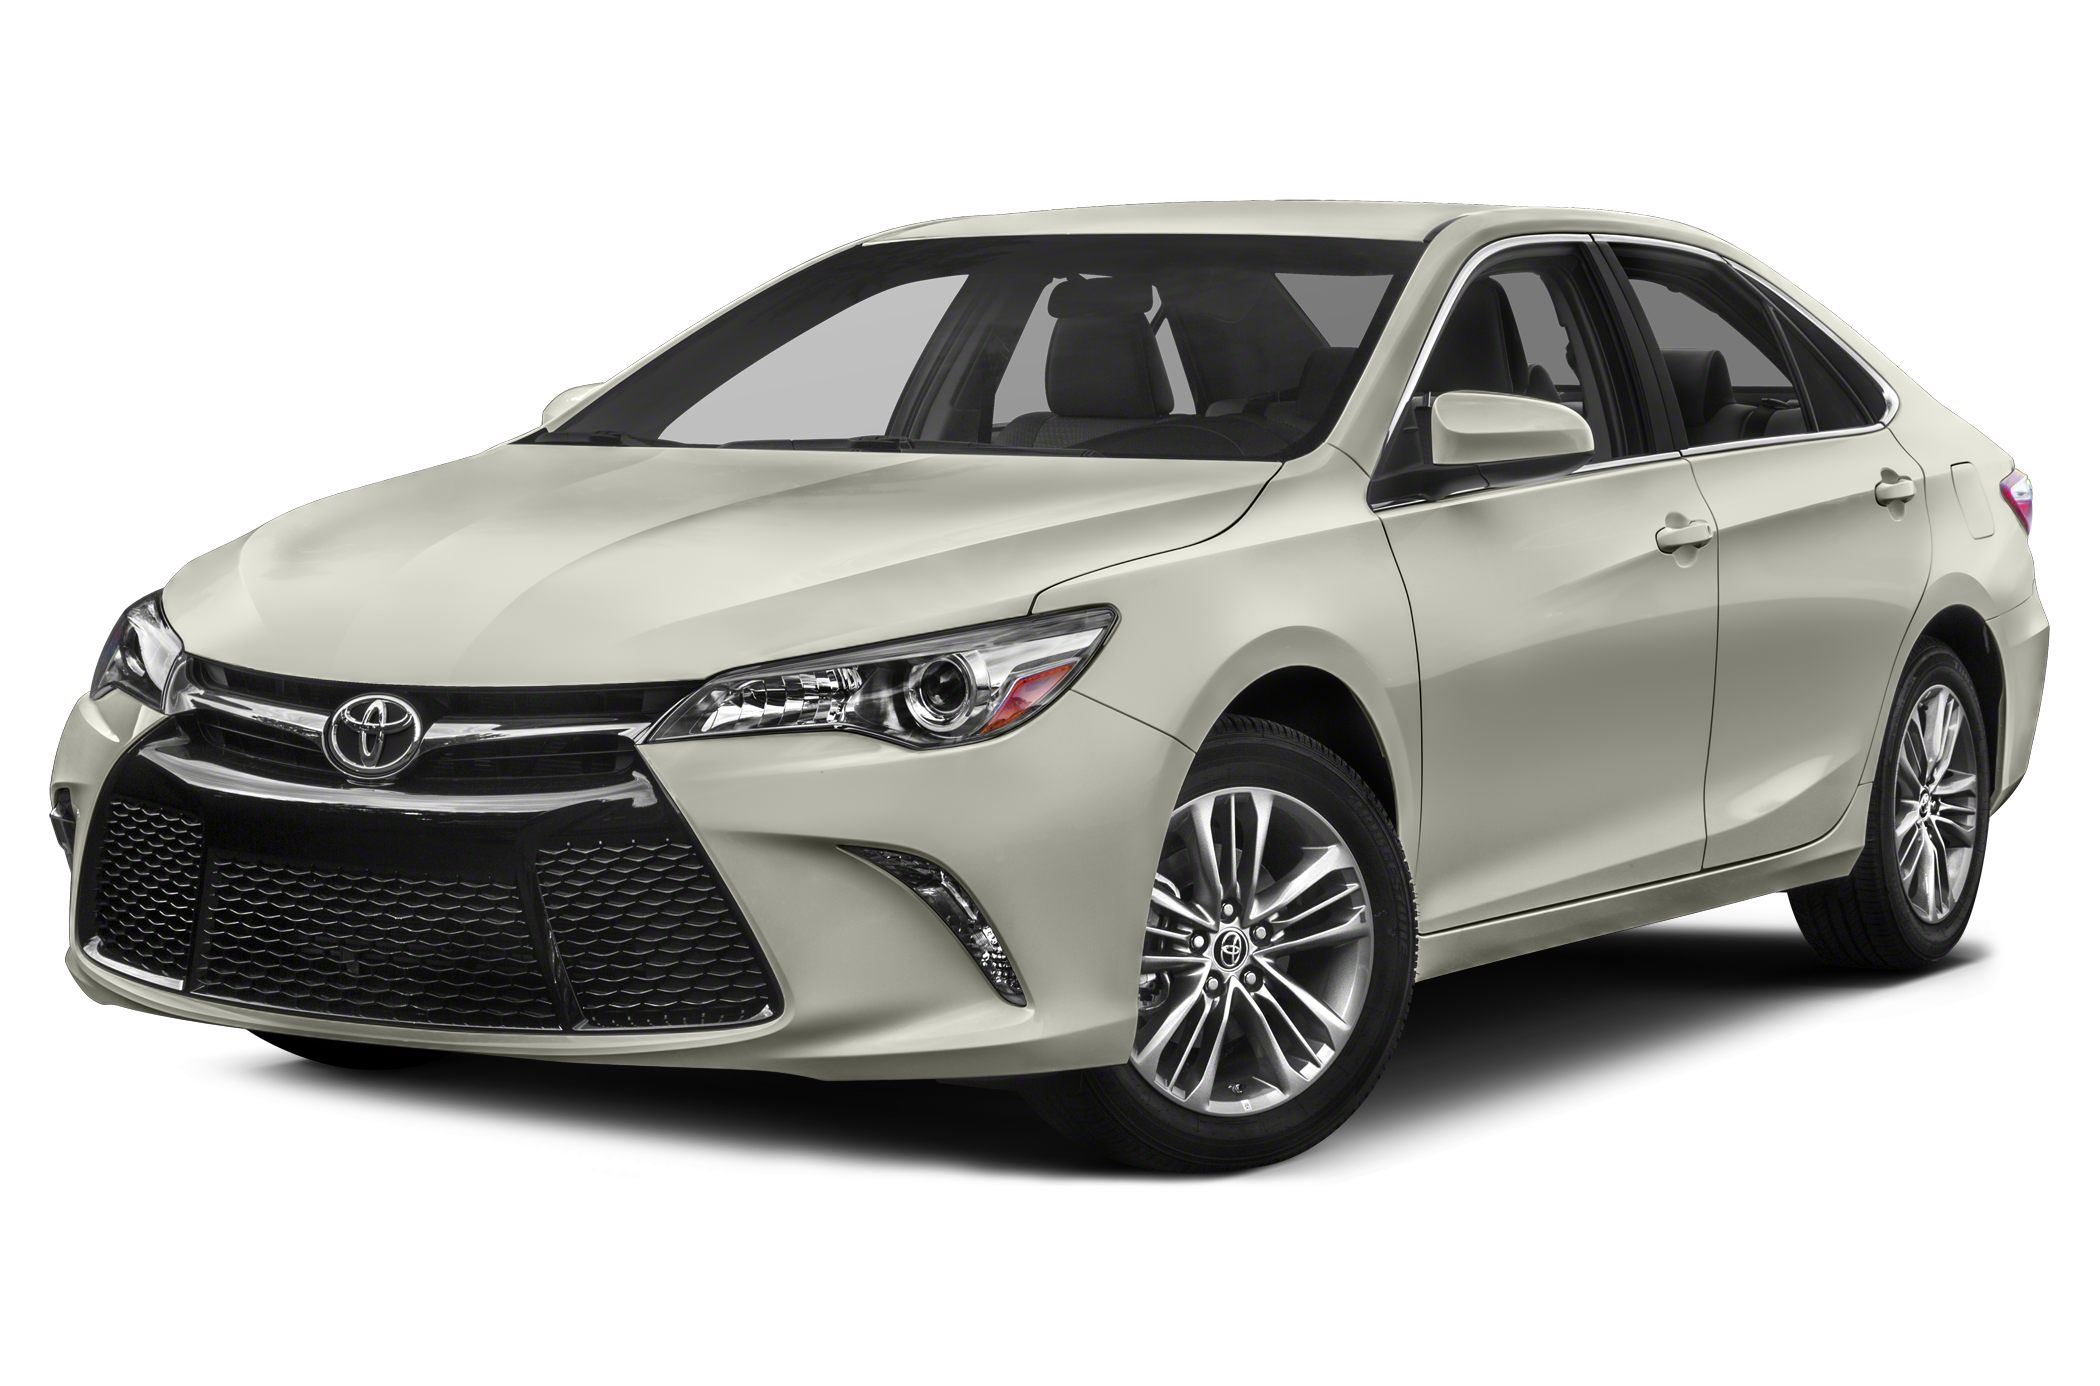 2015 Toyota Camry Xse V6 4dr Sedan Pictures